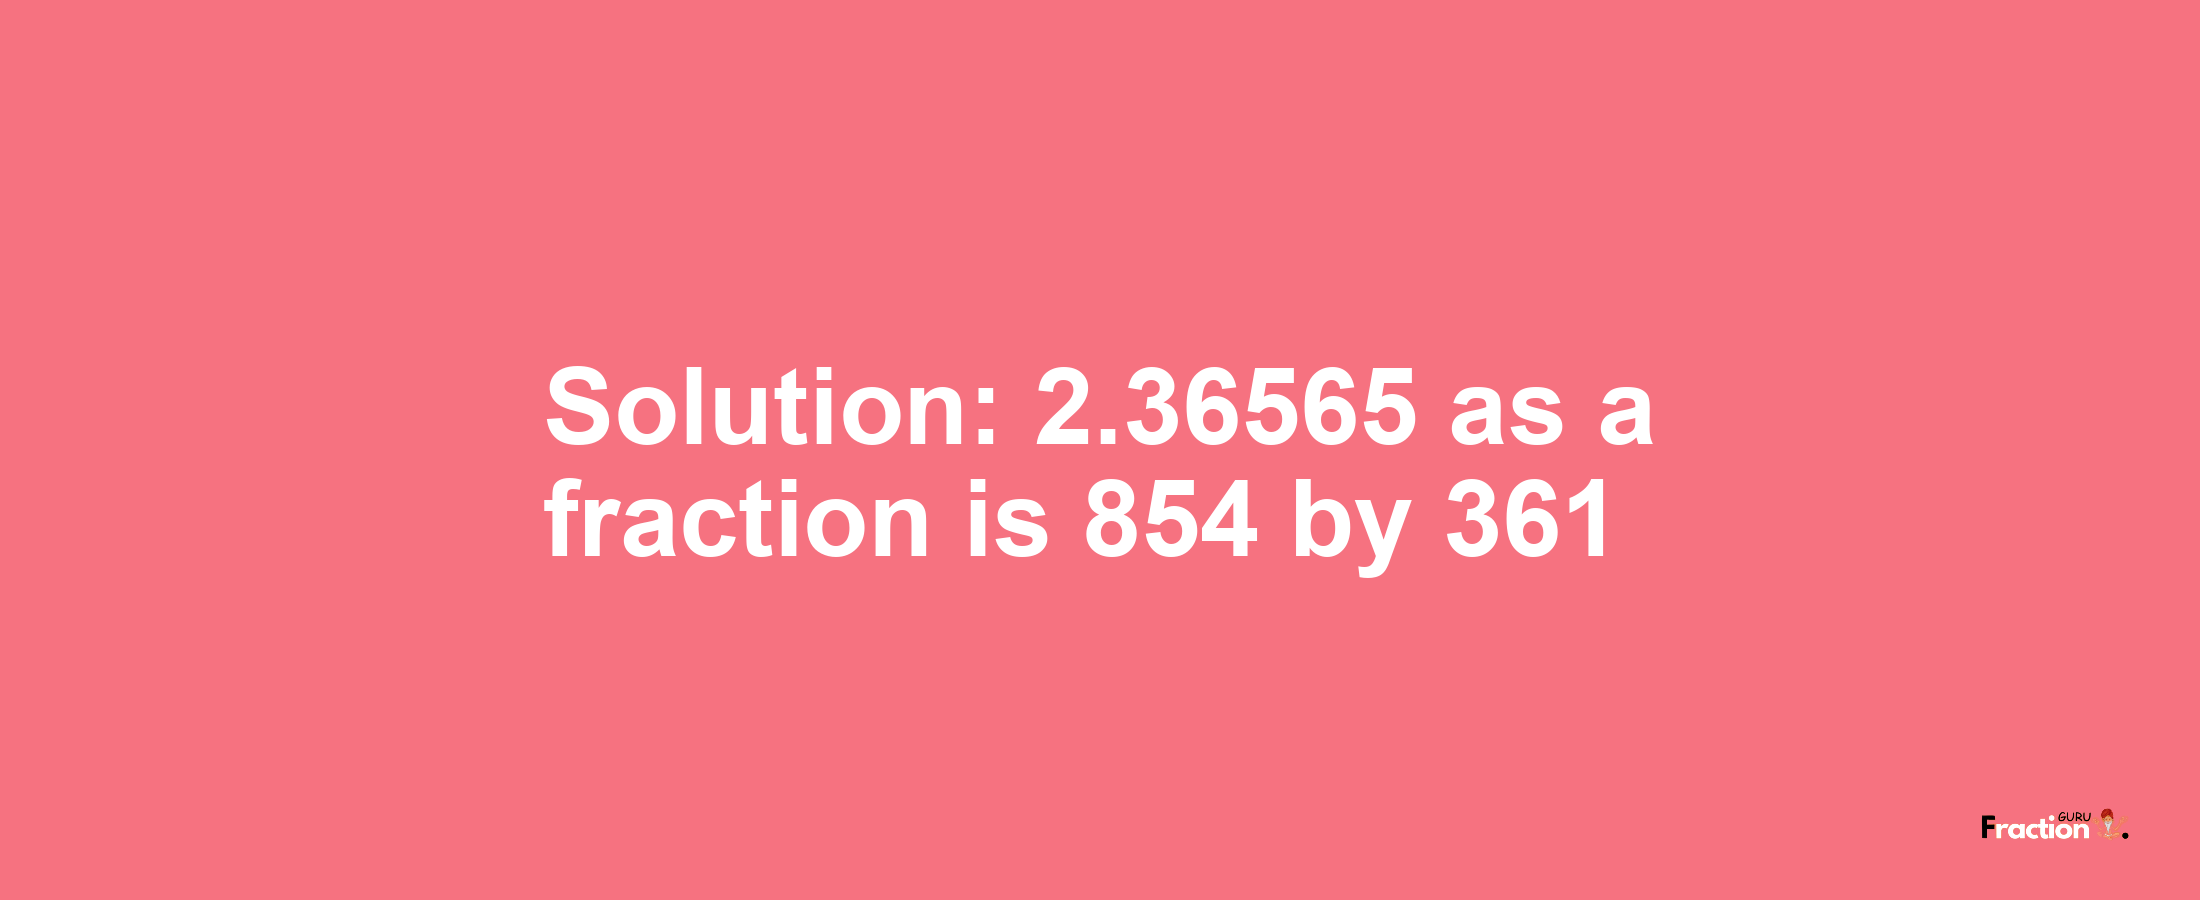 Solution:2.36565 as a fraction is 854/361